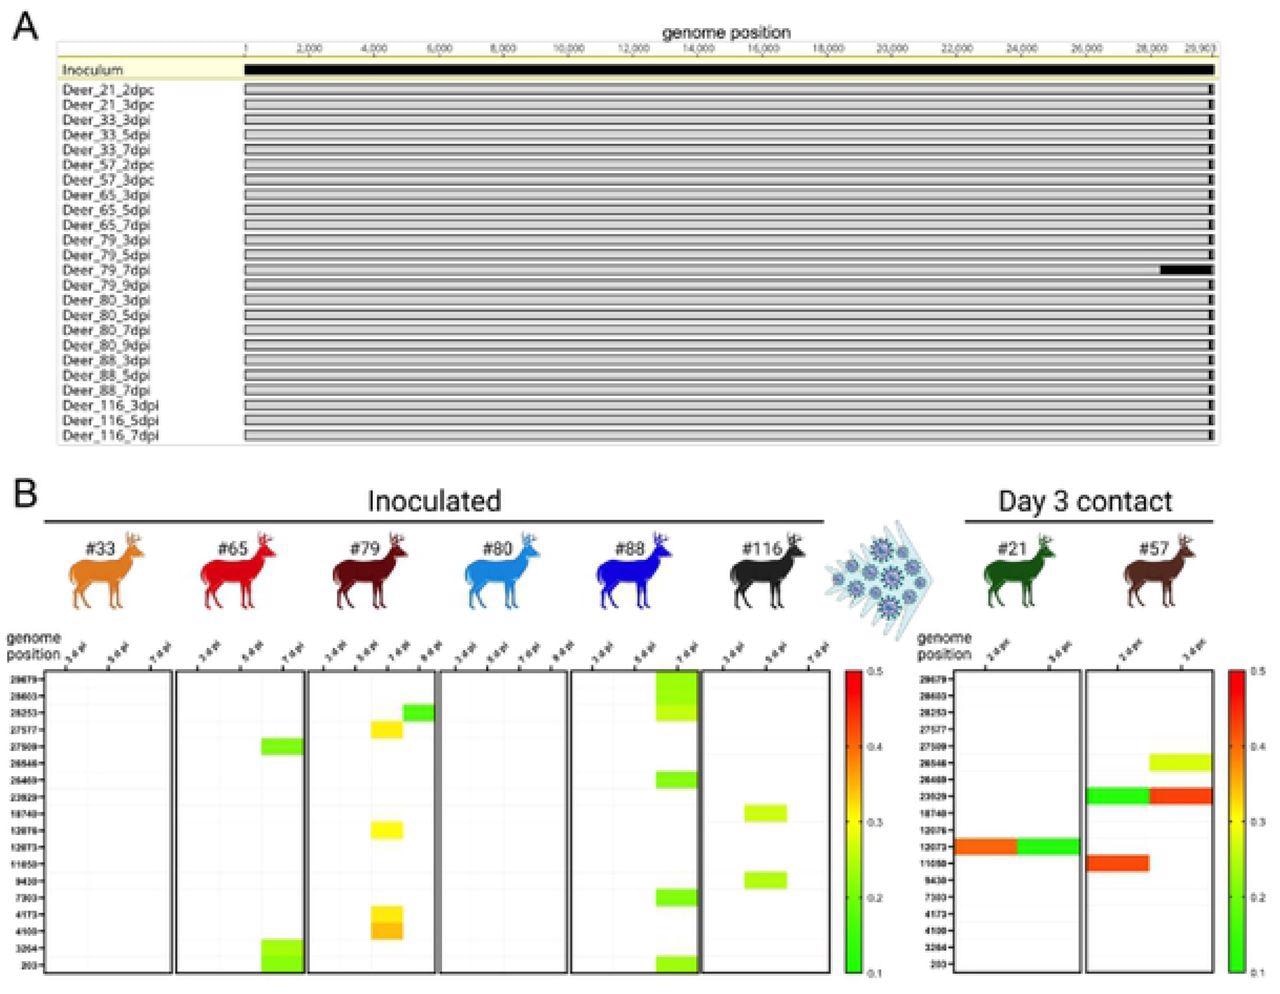 Low genetic diversity observed following SARS-CoV-2 replication and transmission in white-tailed deer. Genome sequences were obtained directly from nasal secretions from all the 6 inoculated fawns collected on days 3, 5, 7 and/or 9 post-inoculation (pi) and from oronasal secretions from the day 3 contact animals (n = 2) collected on days 2 and 3 post-contact (pc). A) Whole genome sequence analyses of SARS-CoV-2 sequences recovered from all inoculated and contact fawns revealed no amino acid differences in the consensus SARS-CoV-2 genome in comparison to the genome sequence of the inoculum virus isolate NYI67-20. B) Minor variant viral populations distributed throughout the virus genome from inoculated fawns on days 3, 5, 7 and/or 9 pi and from oronasal secretions from the day 3 contact animals (n = 2) collected on days 2 and 3 pc.